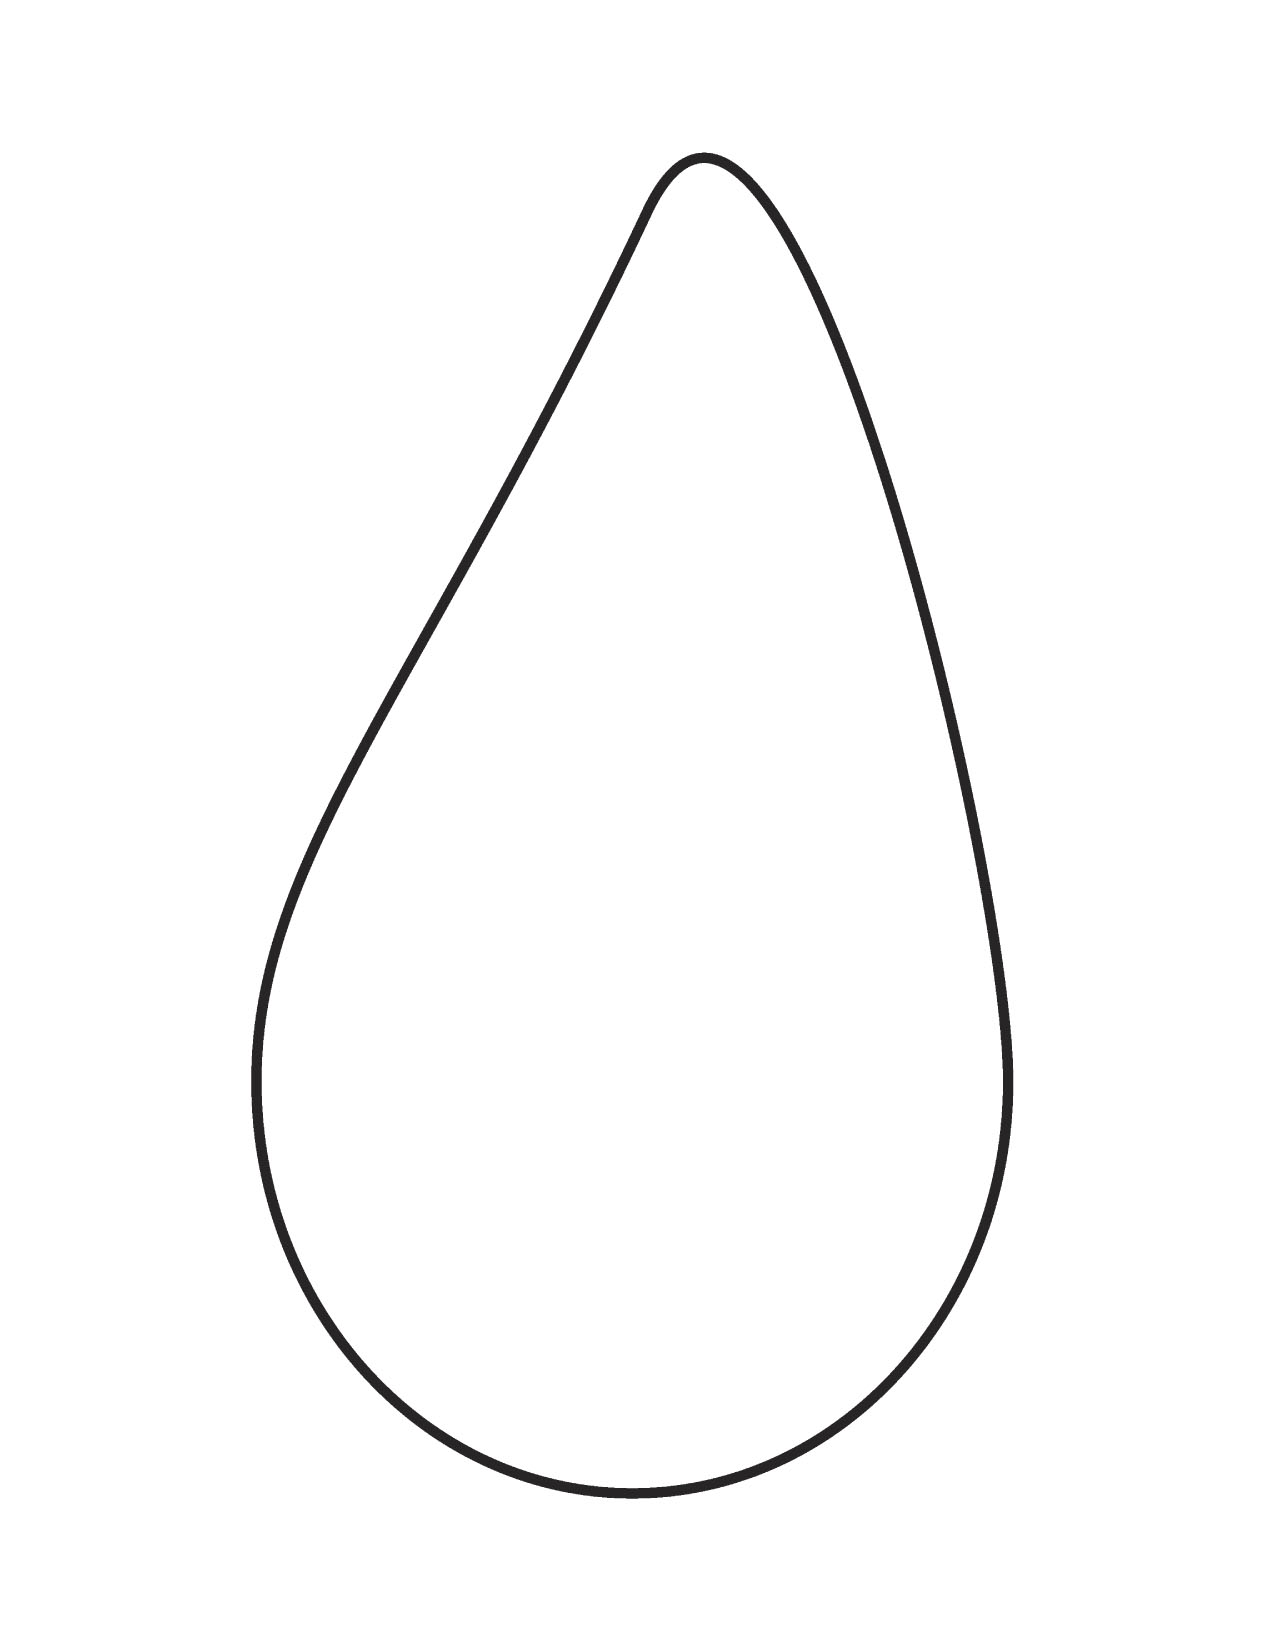 Raindrop Clipart Black And White | Clipart library - Free Clipart Images